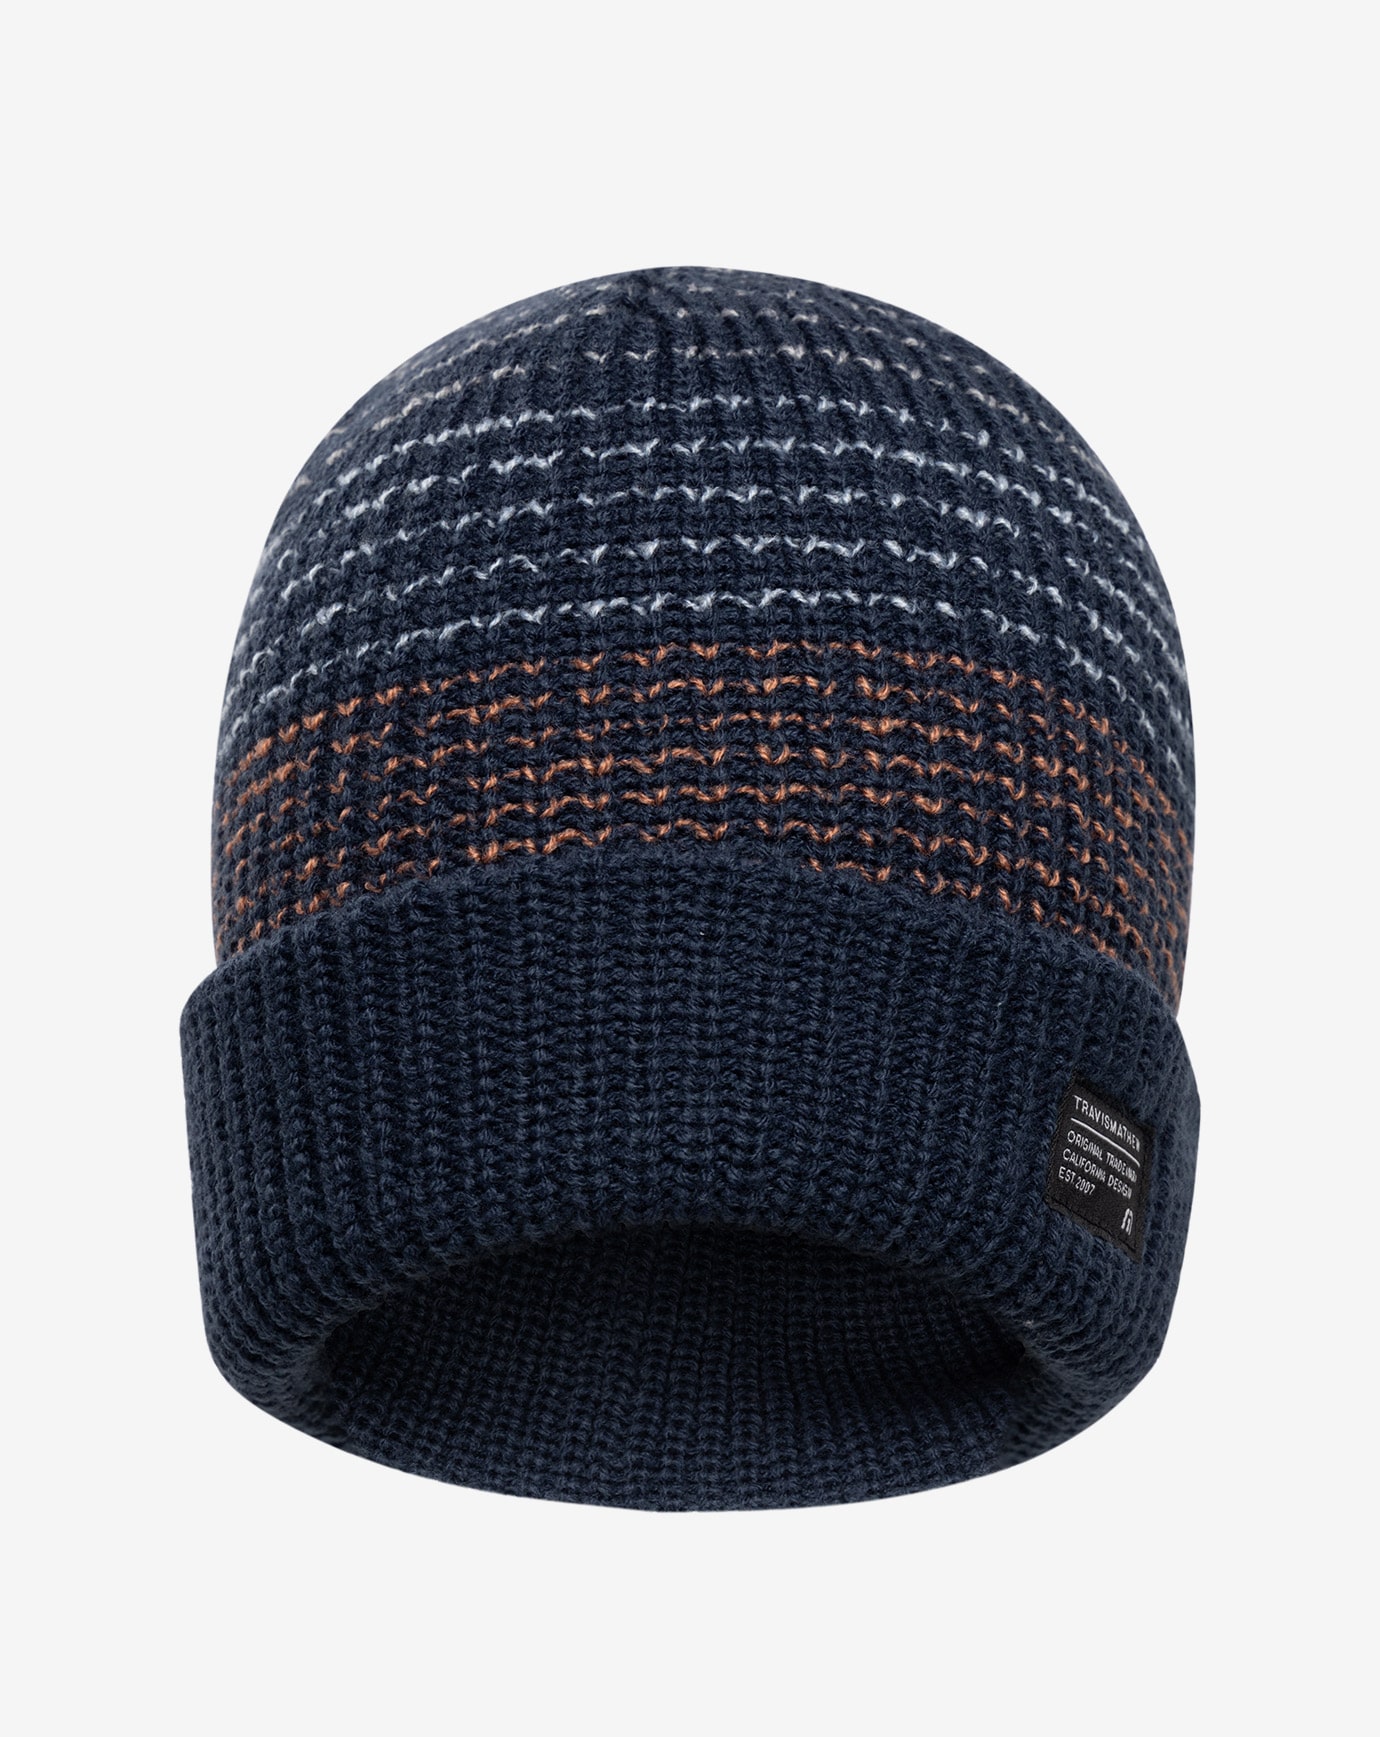 Related Product - DELGADO BEANIE